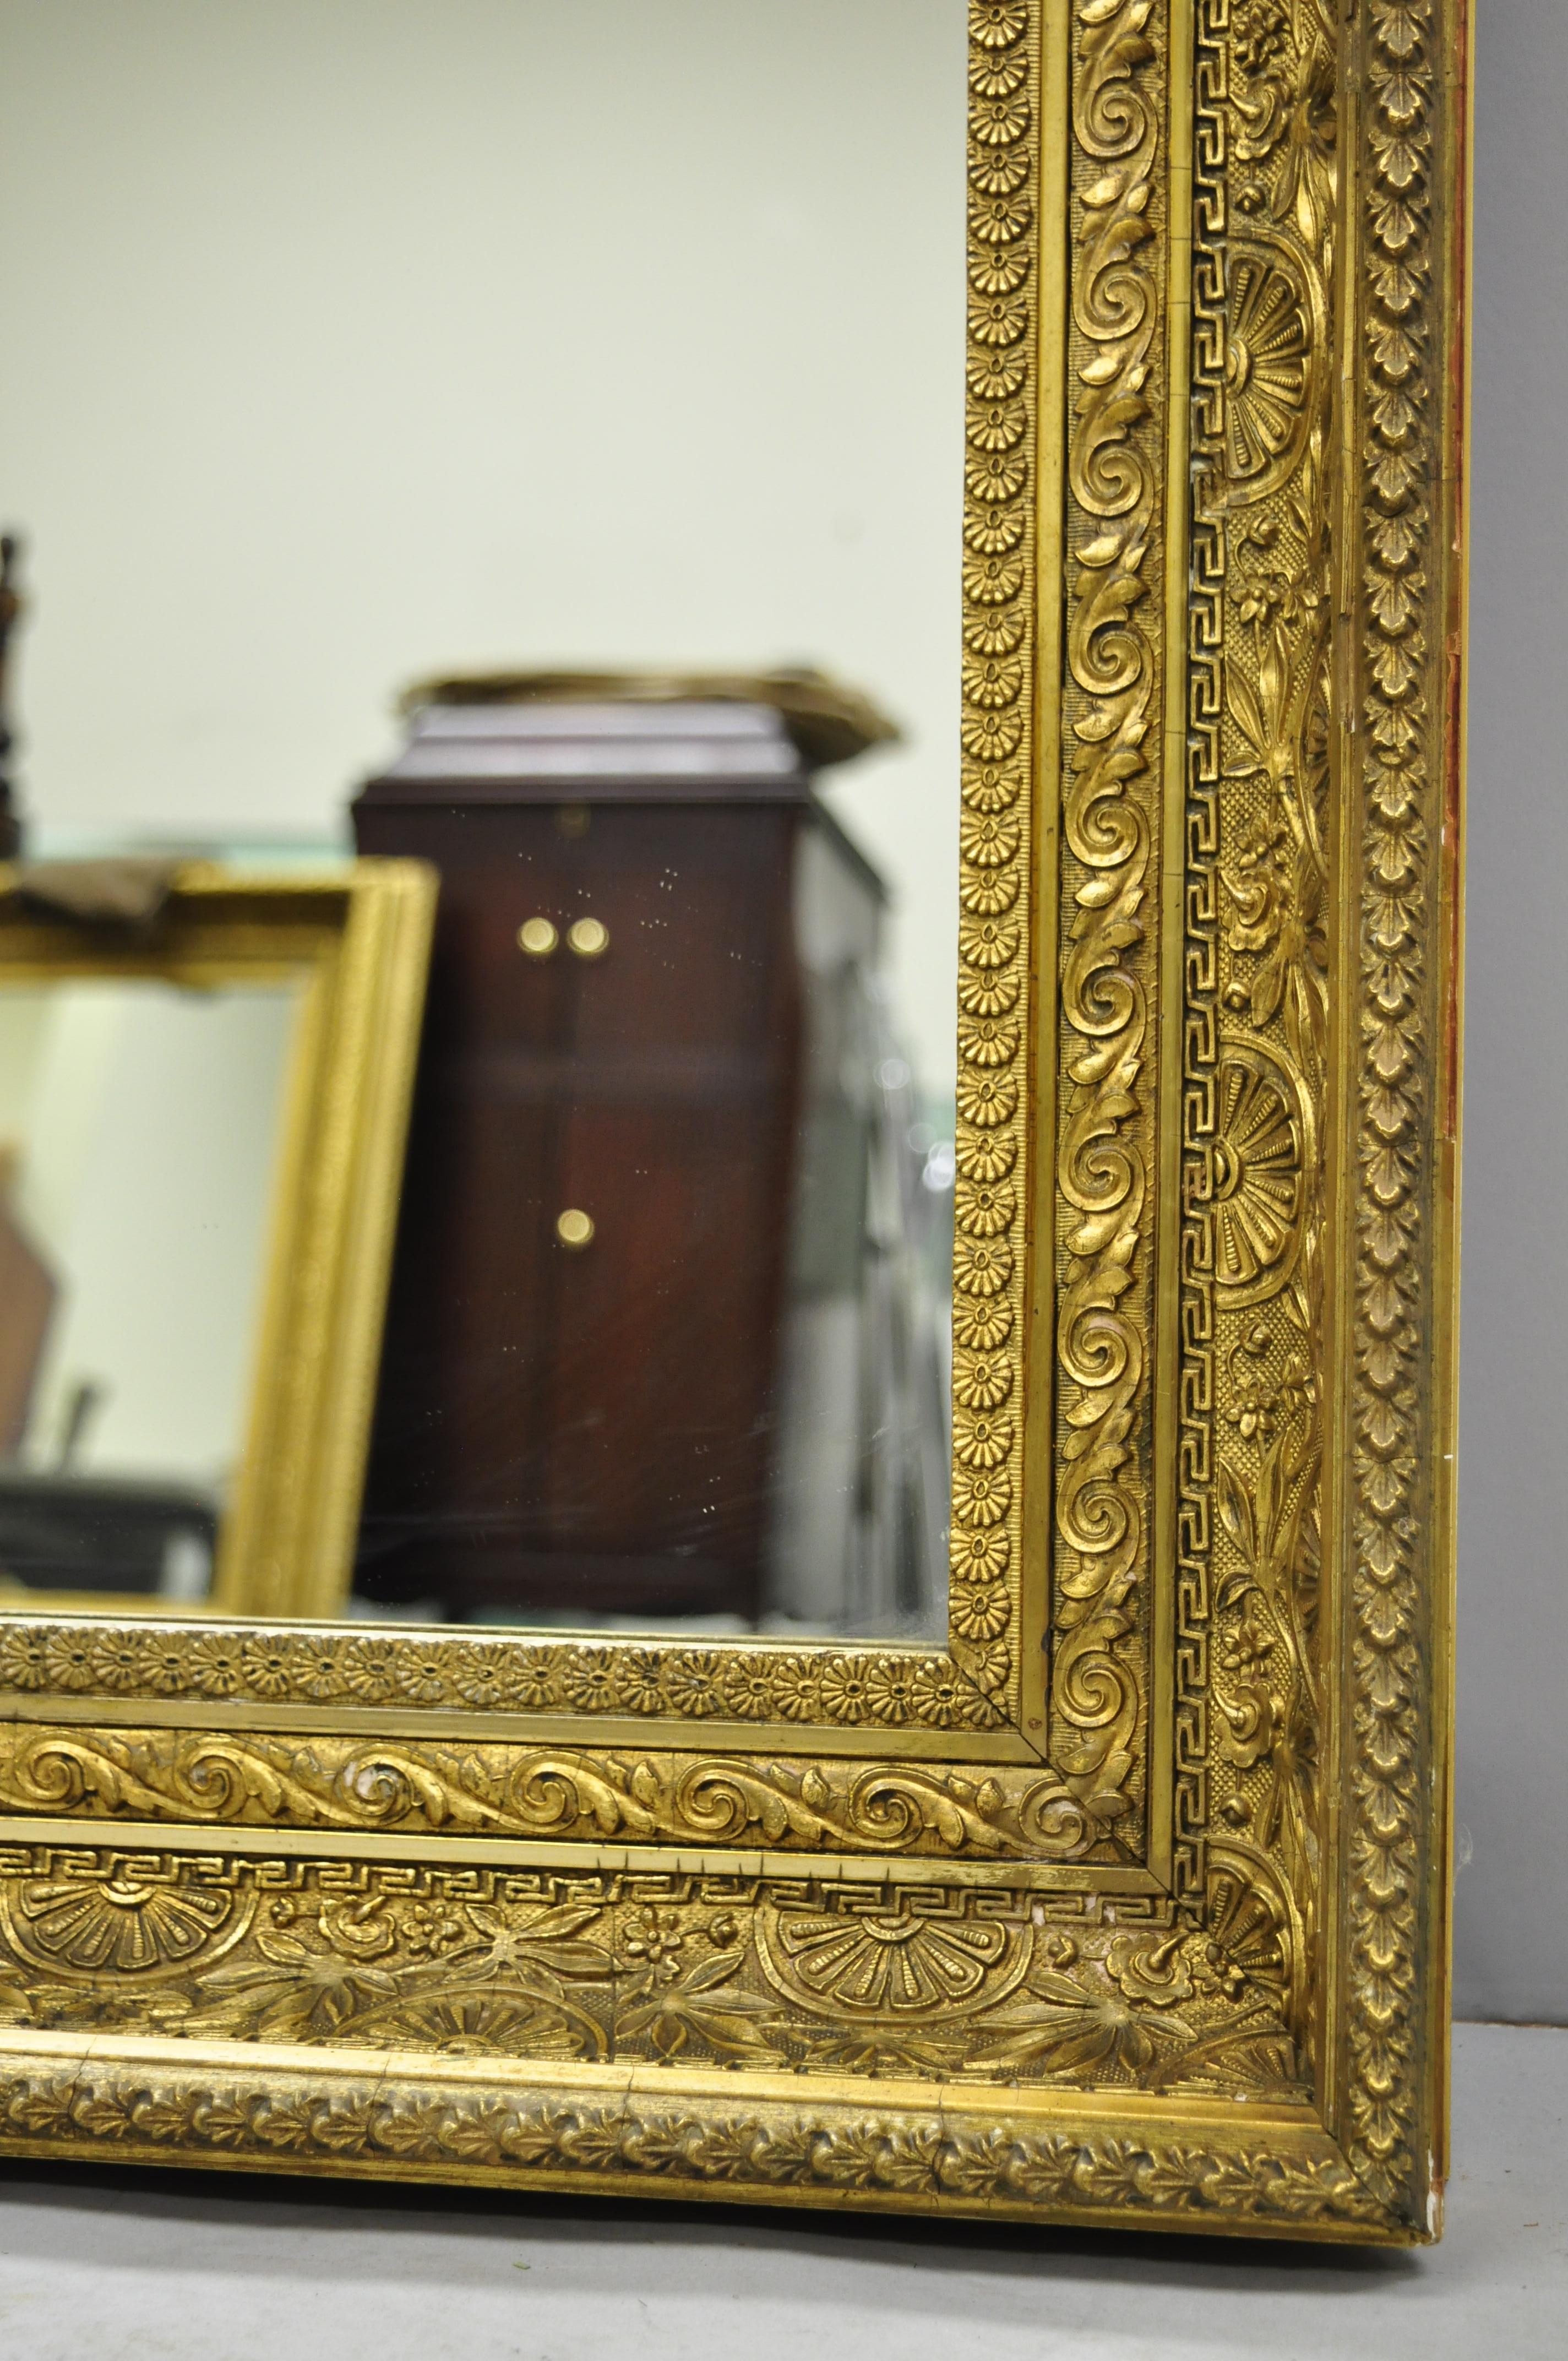 19th century gold gilt and gesso wood frame wall mirror with foliate design. Item features ornate gold gilt gesso foliate, wooden frame, central mirror, very nice antique item, circa 19th century. Measurements: 30